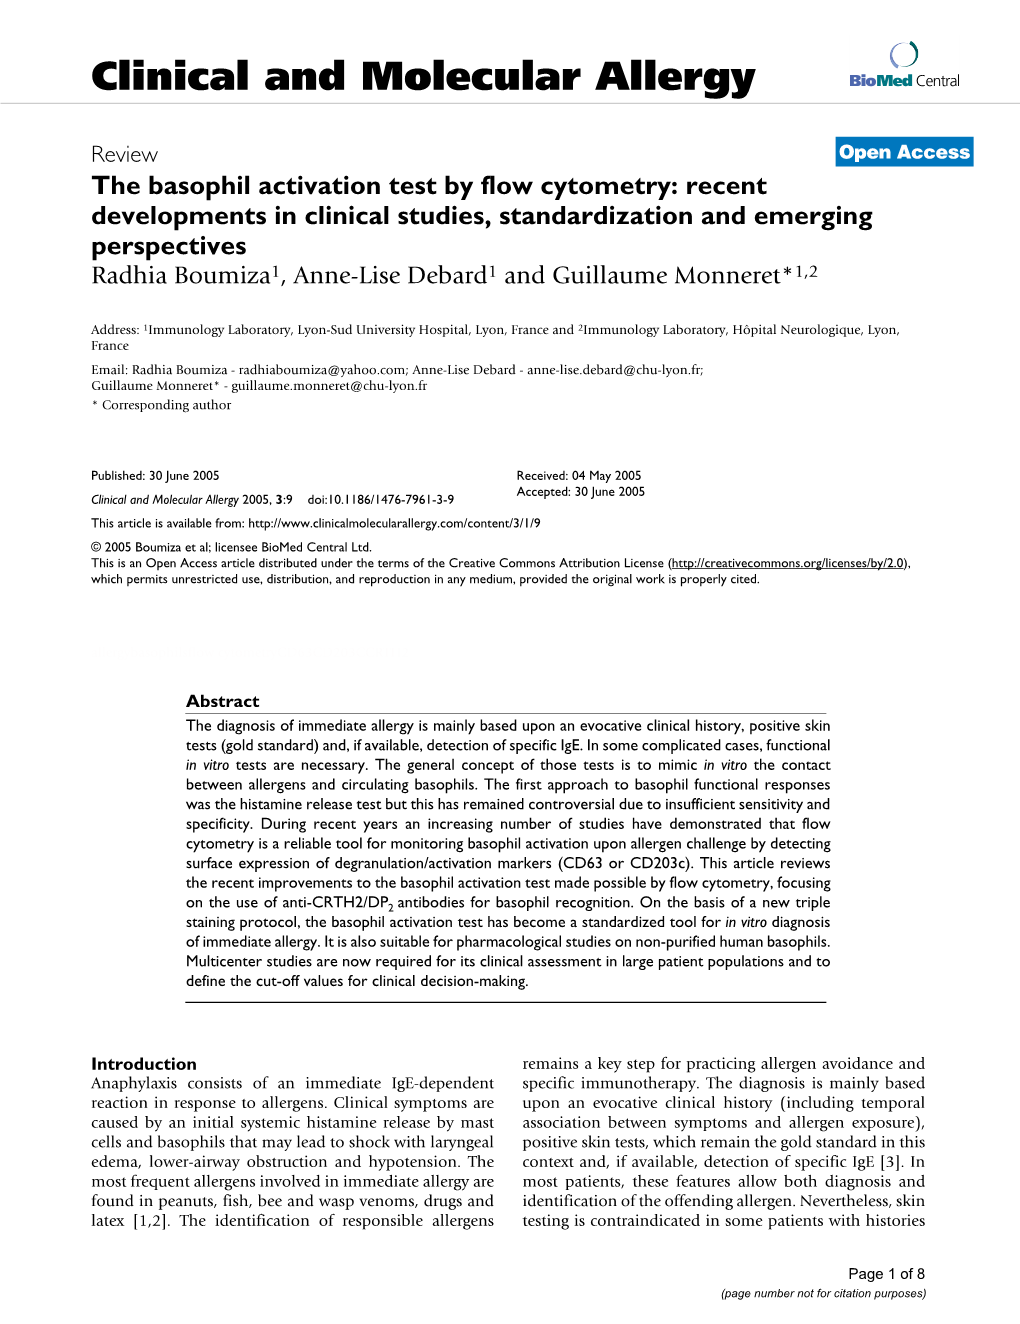 The Basophil Activation Test by Flow Cytometry